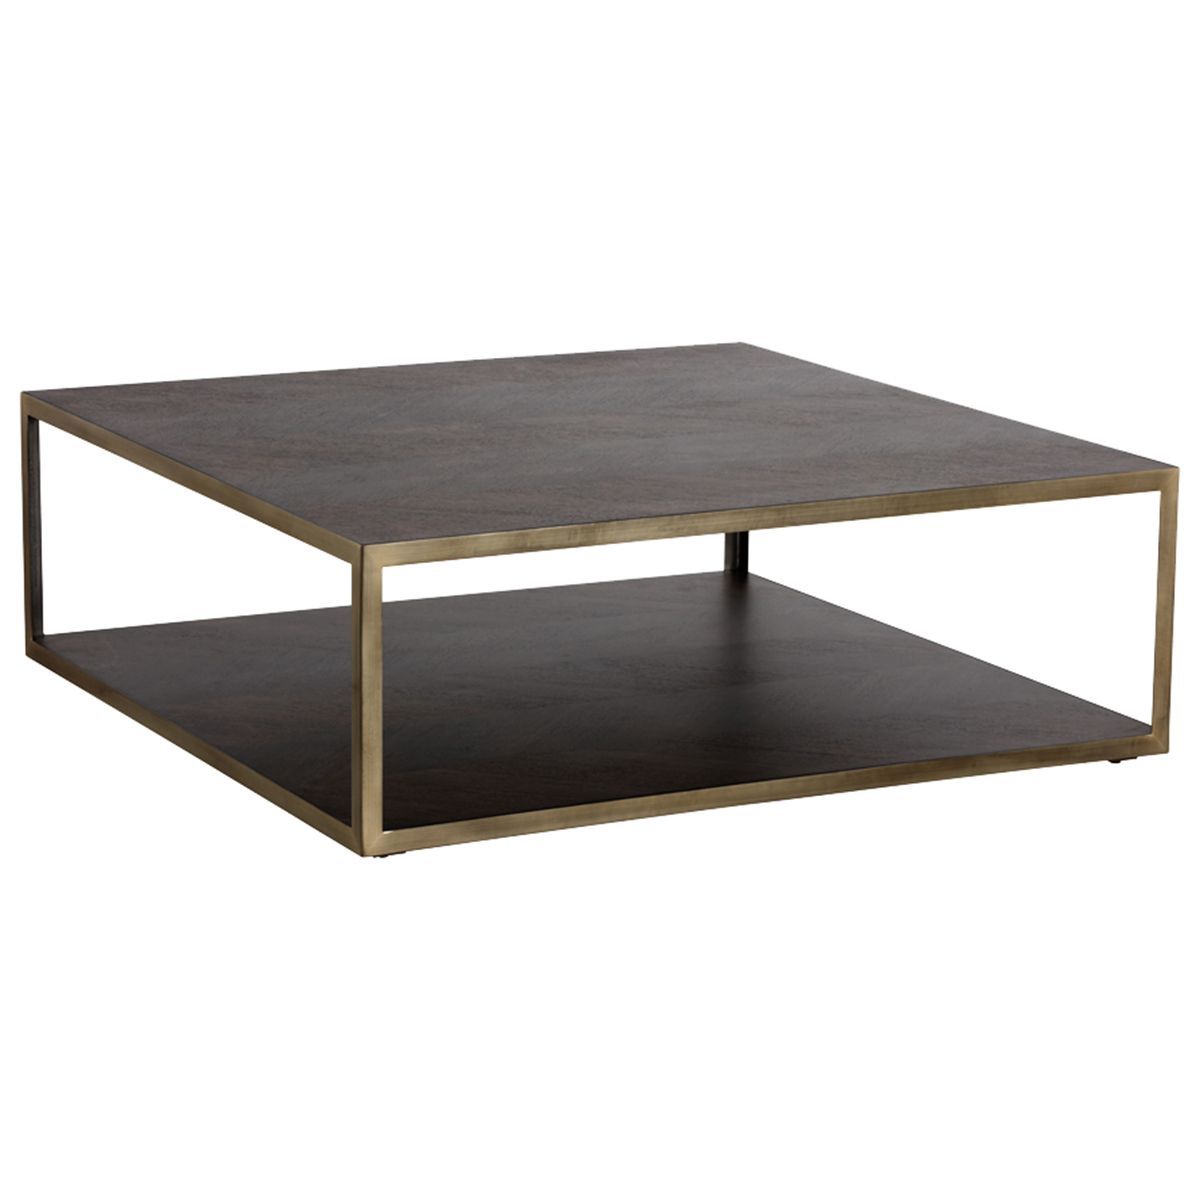 Zenn Mara Square Coffee Table | Coffee Table Square, Coffee Table Pertaining To Transitional Square Coffee Tables (Gallery 6 of 20)